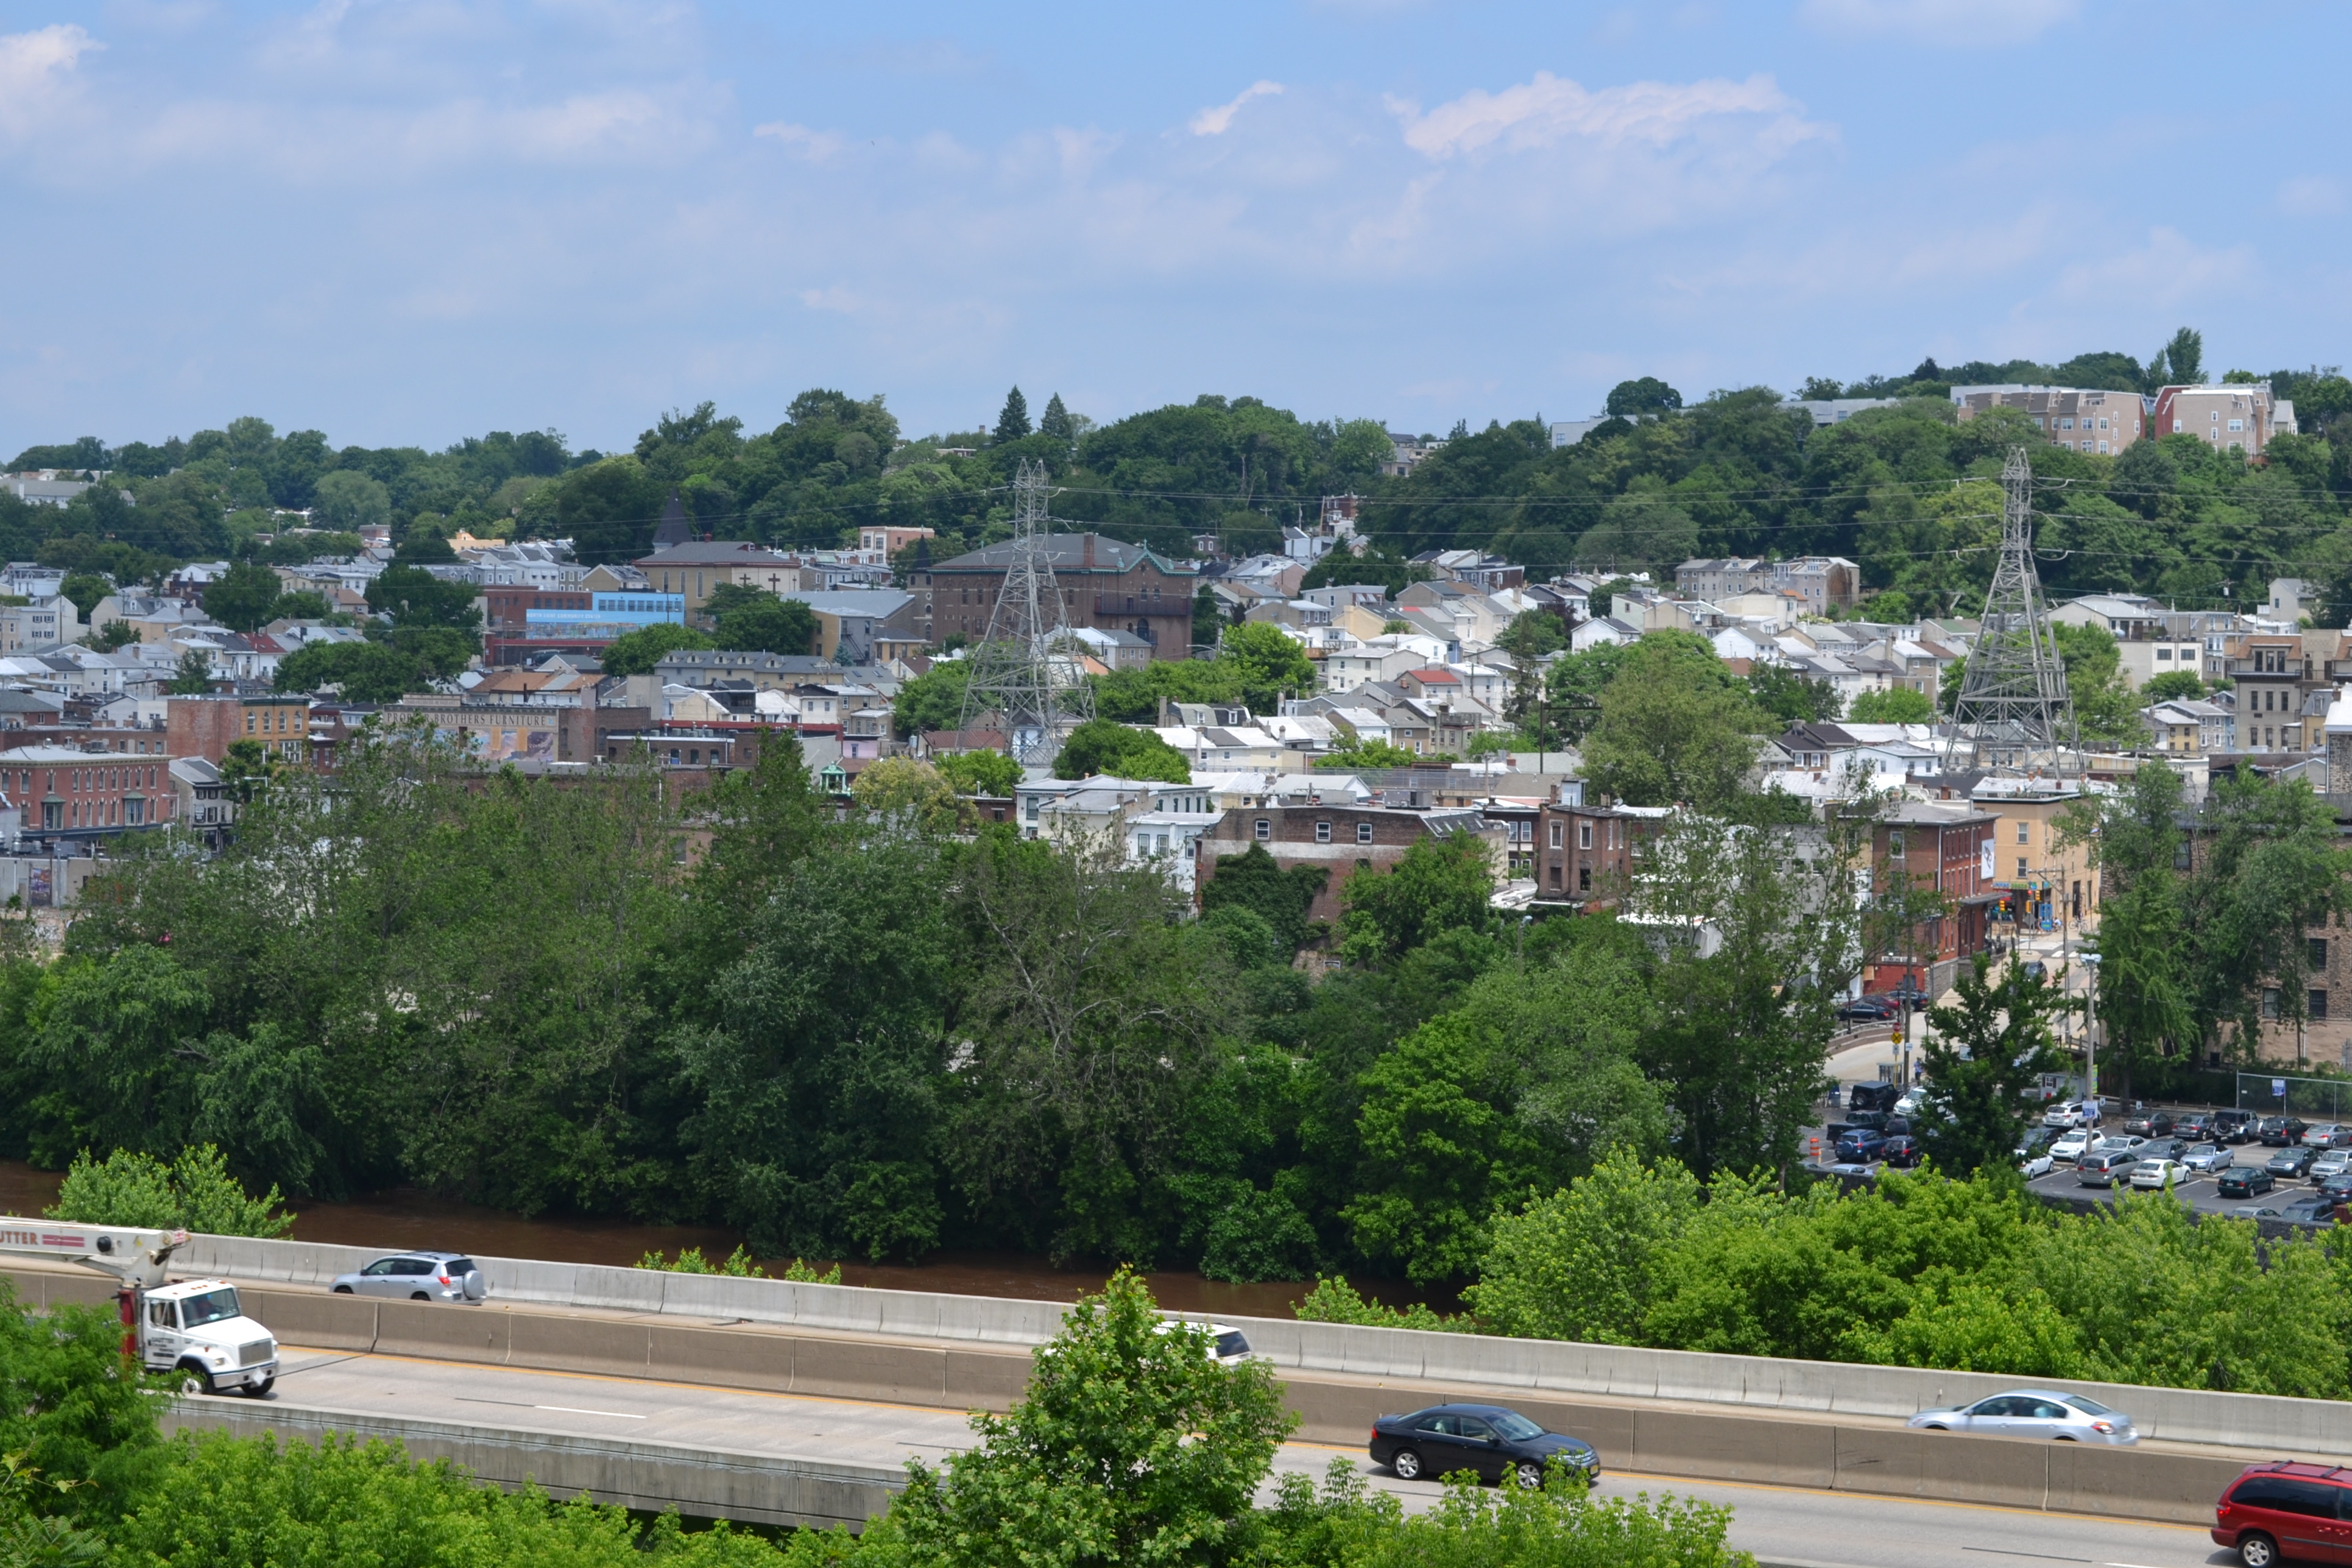 The trail offers a sweeping view of Manayunk